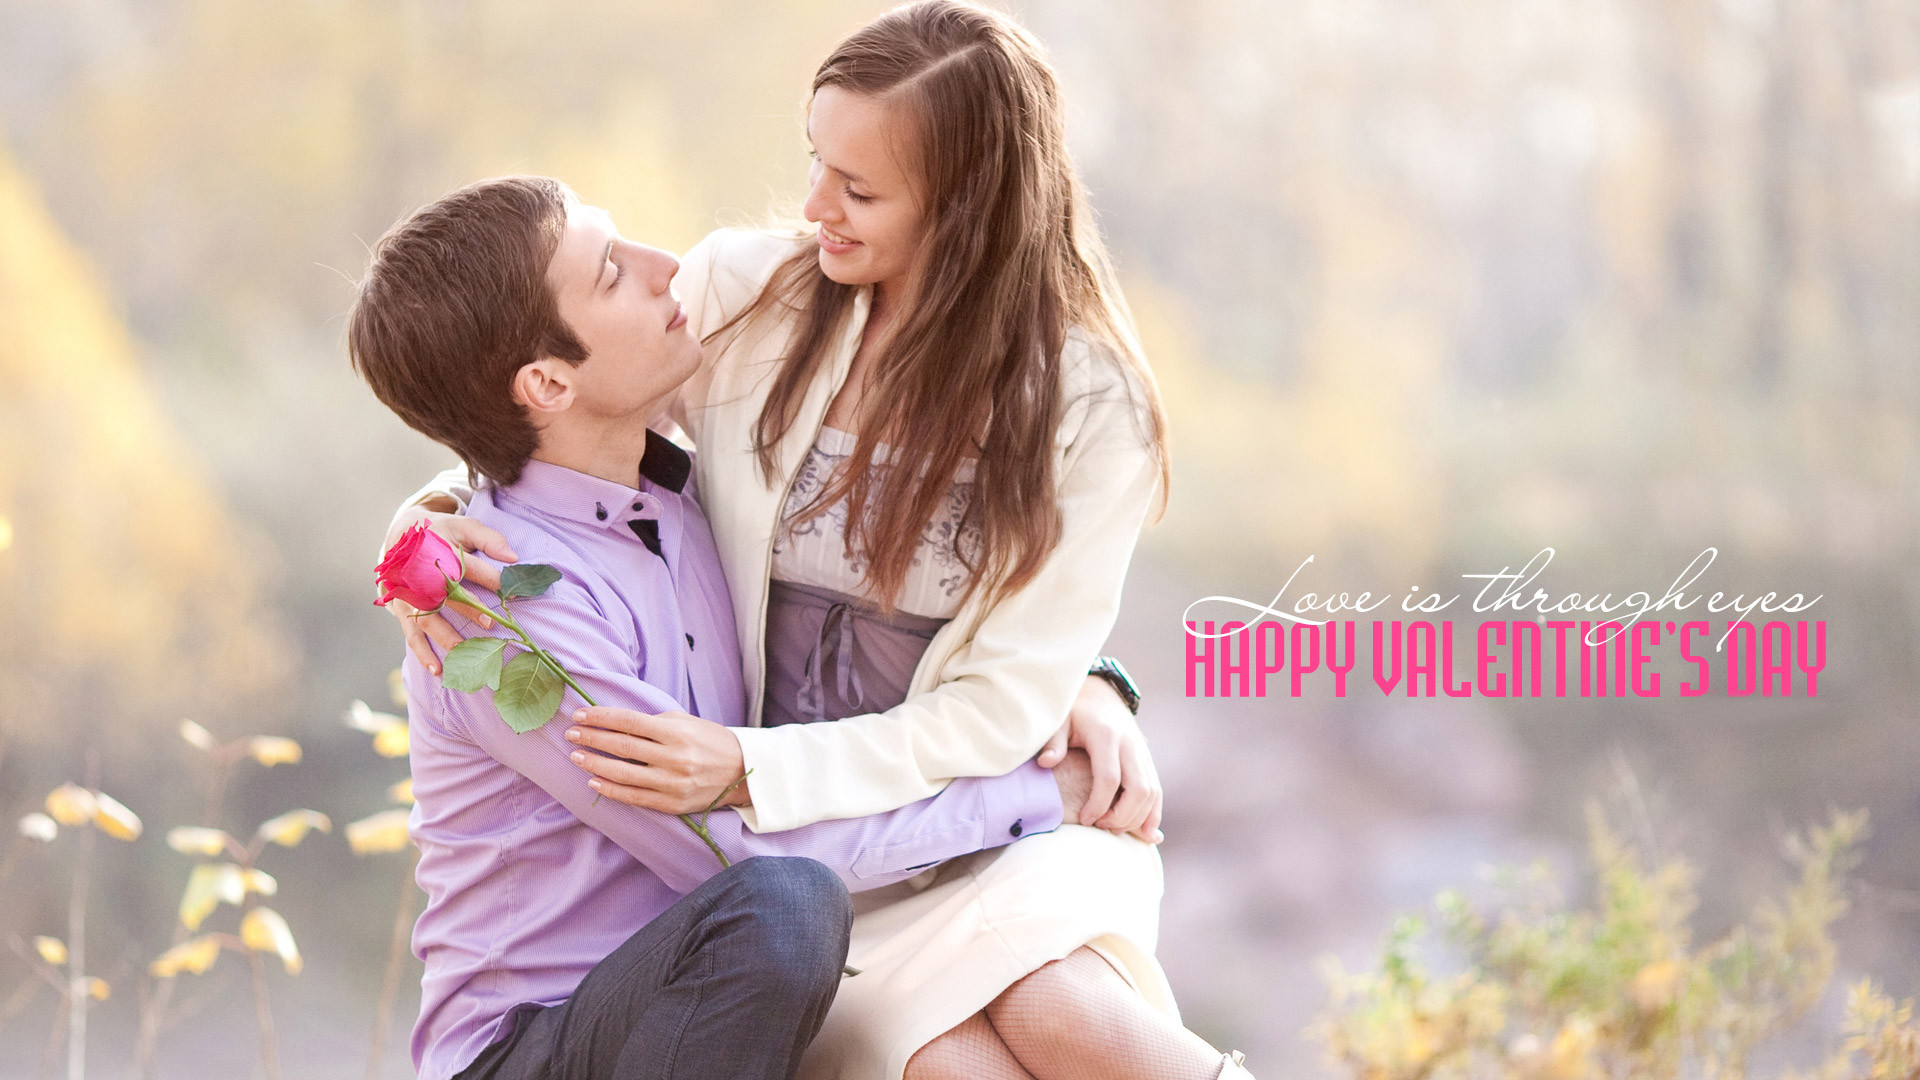 1920x1080 valentines day romantic pictures hd